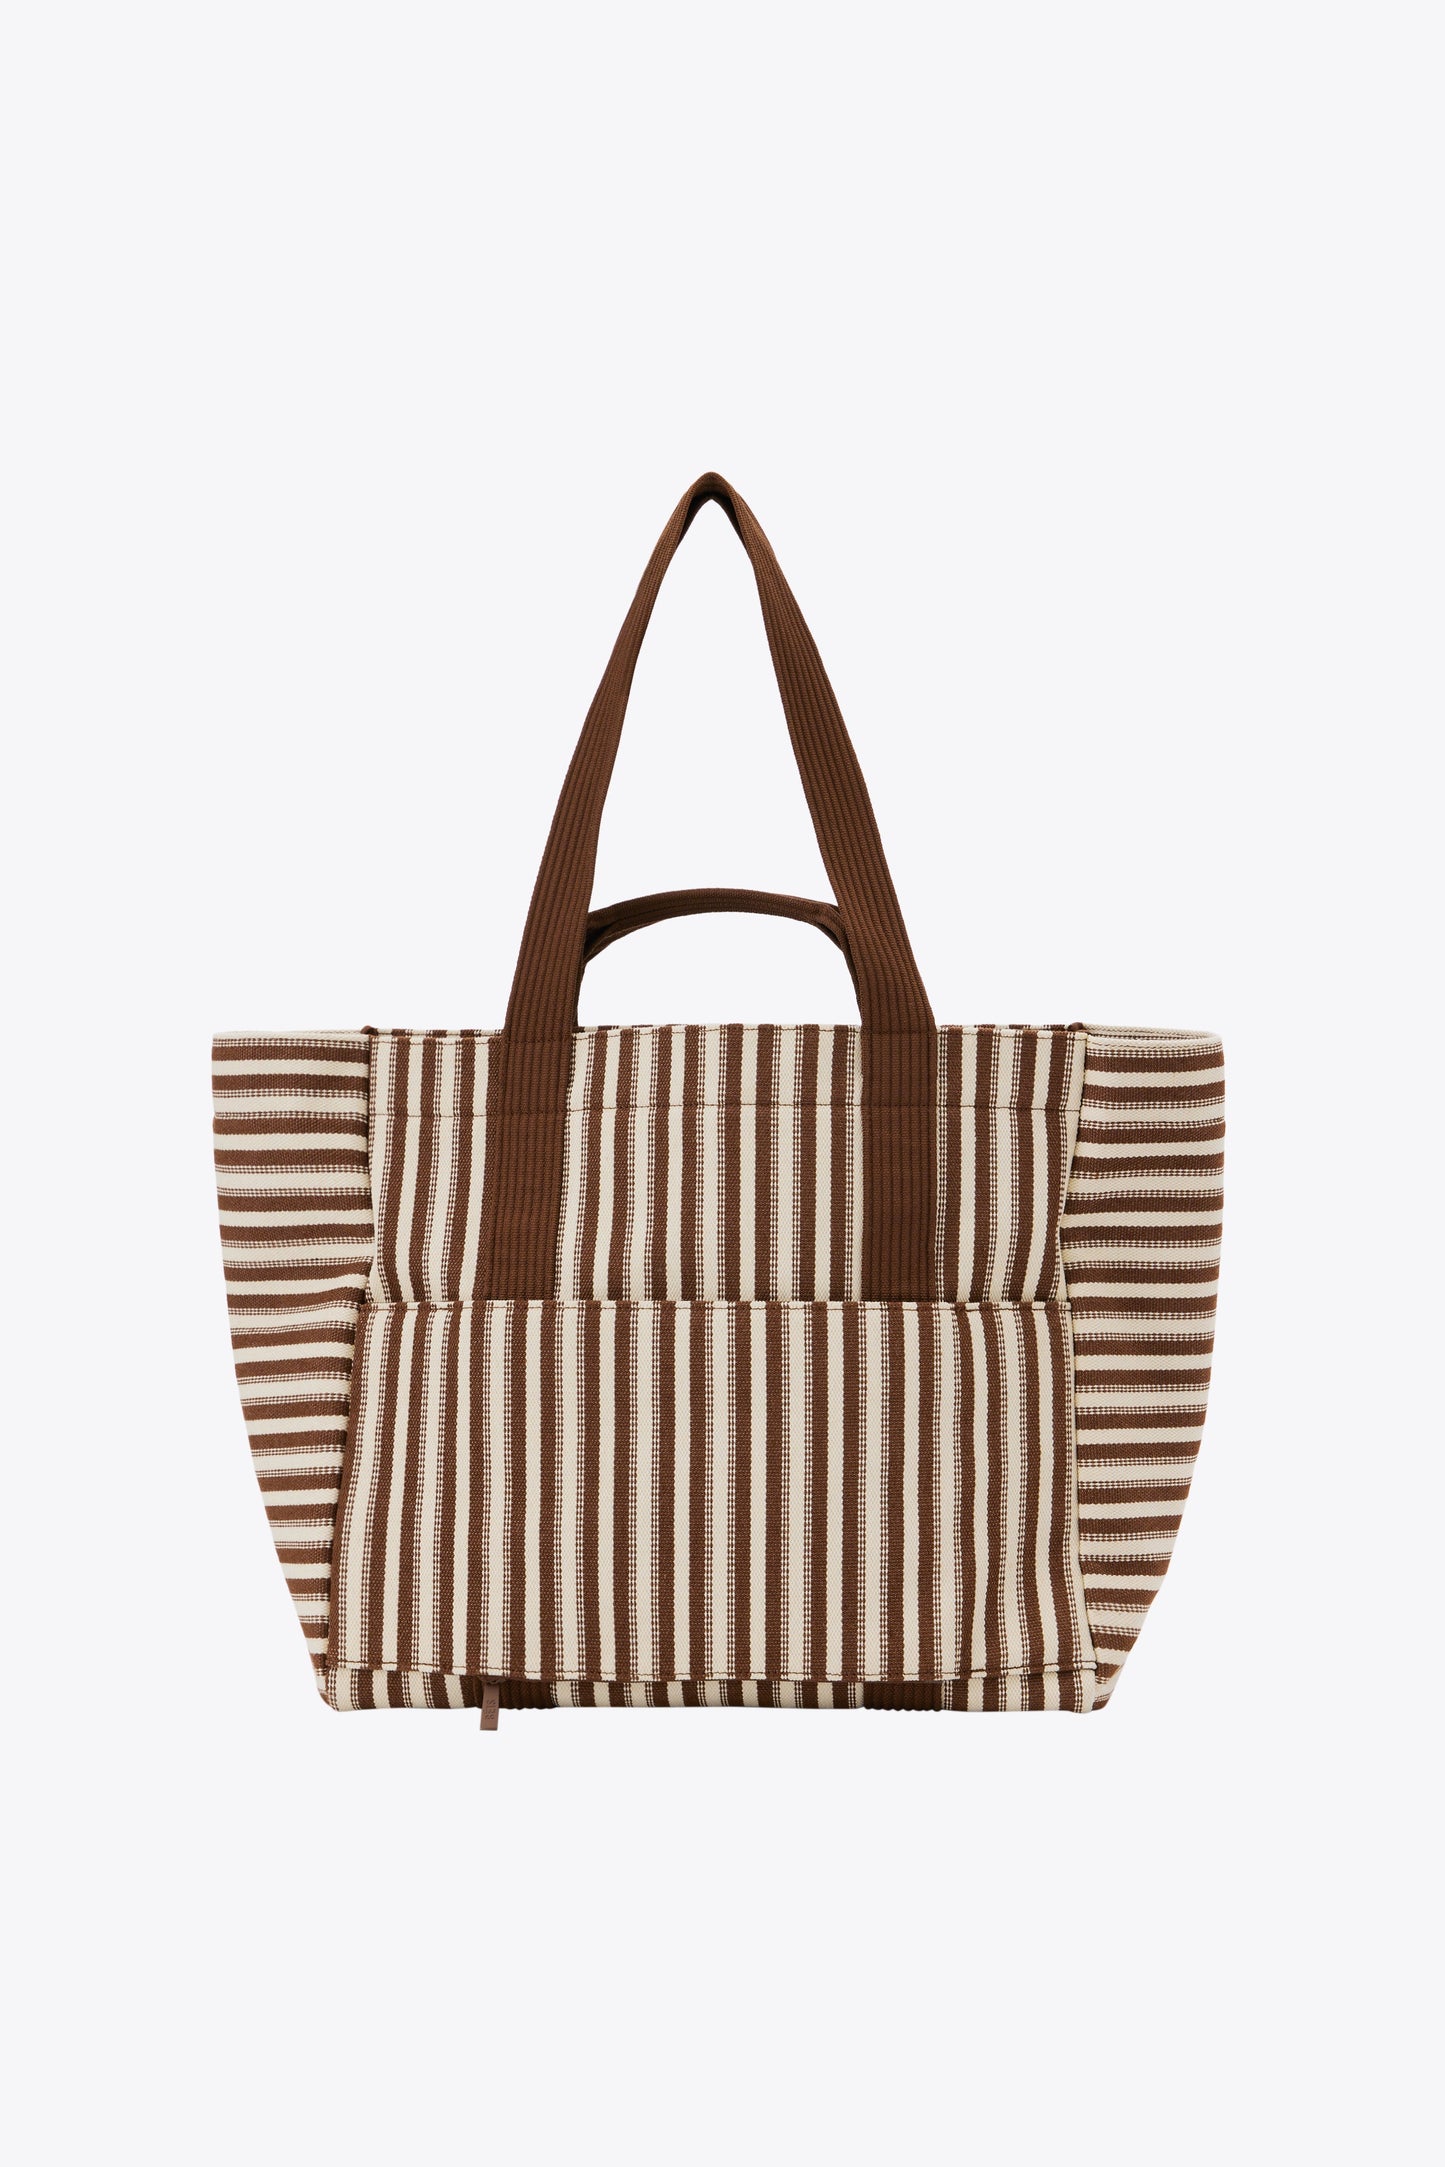 The Vacation Tote in Maple Stripe